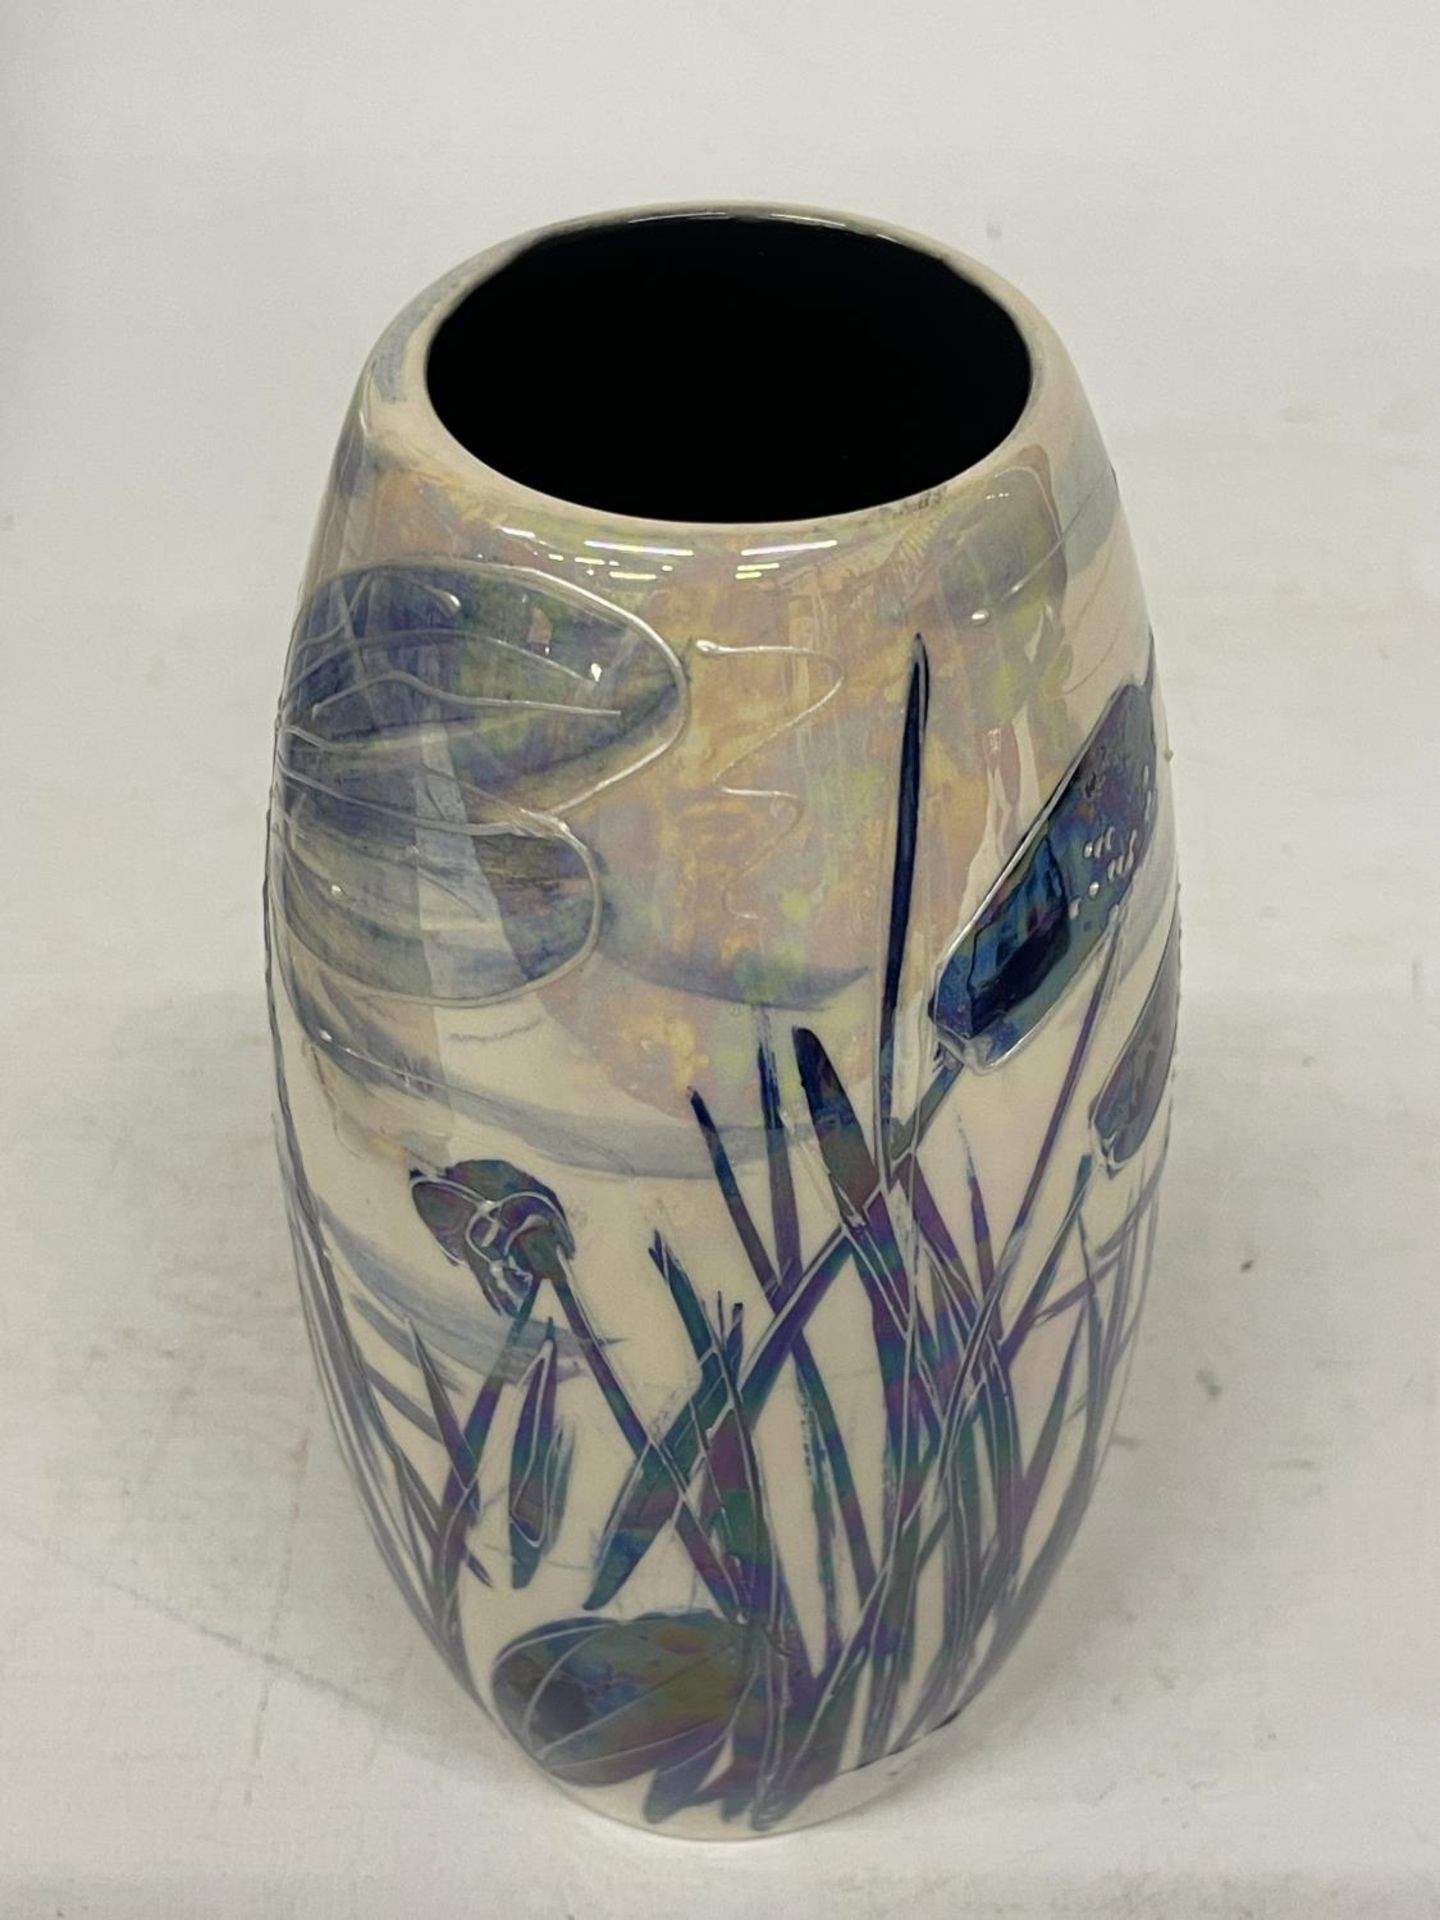 AN ANITA HARRIS DRAGONFLY LUSTRE VASE SIGNED IN GOLD - Image 4 of 5